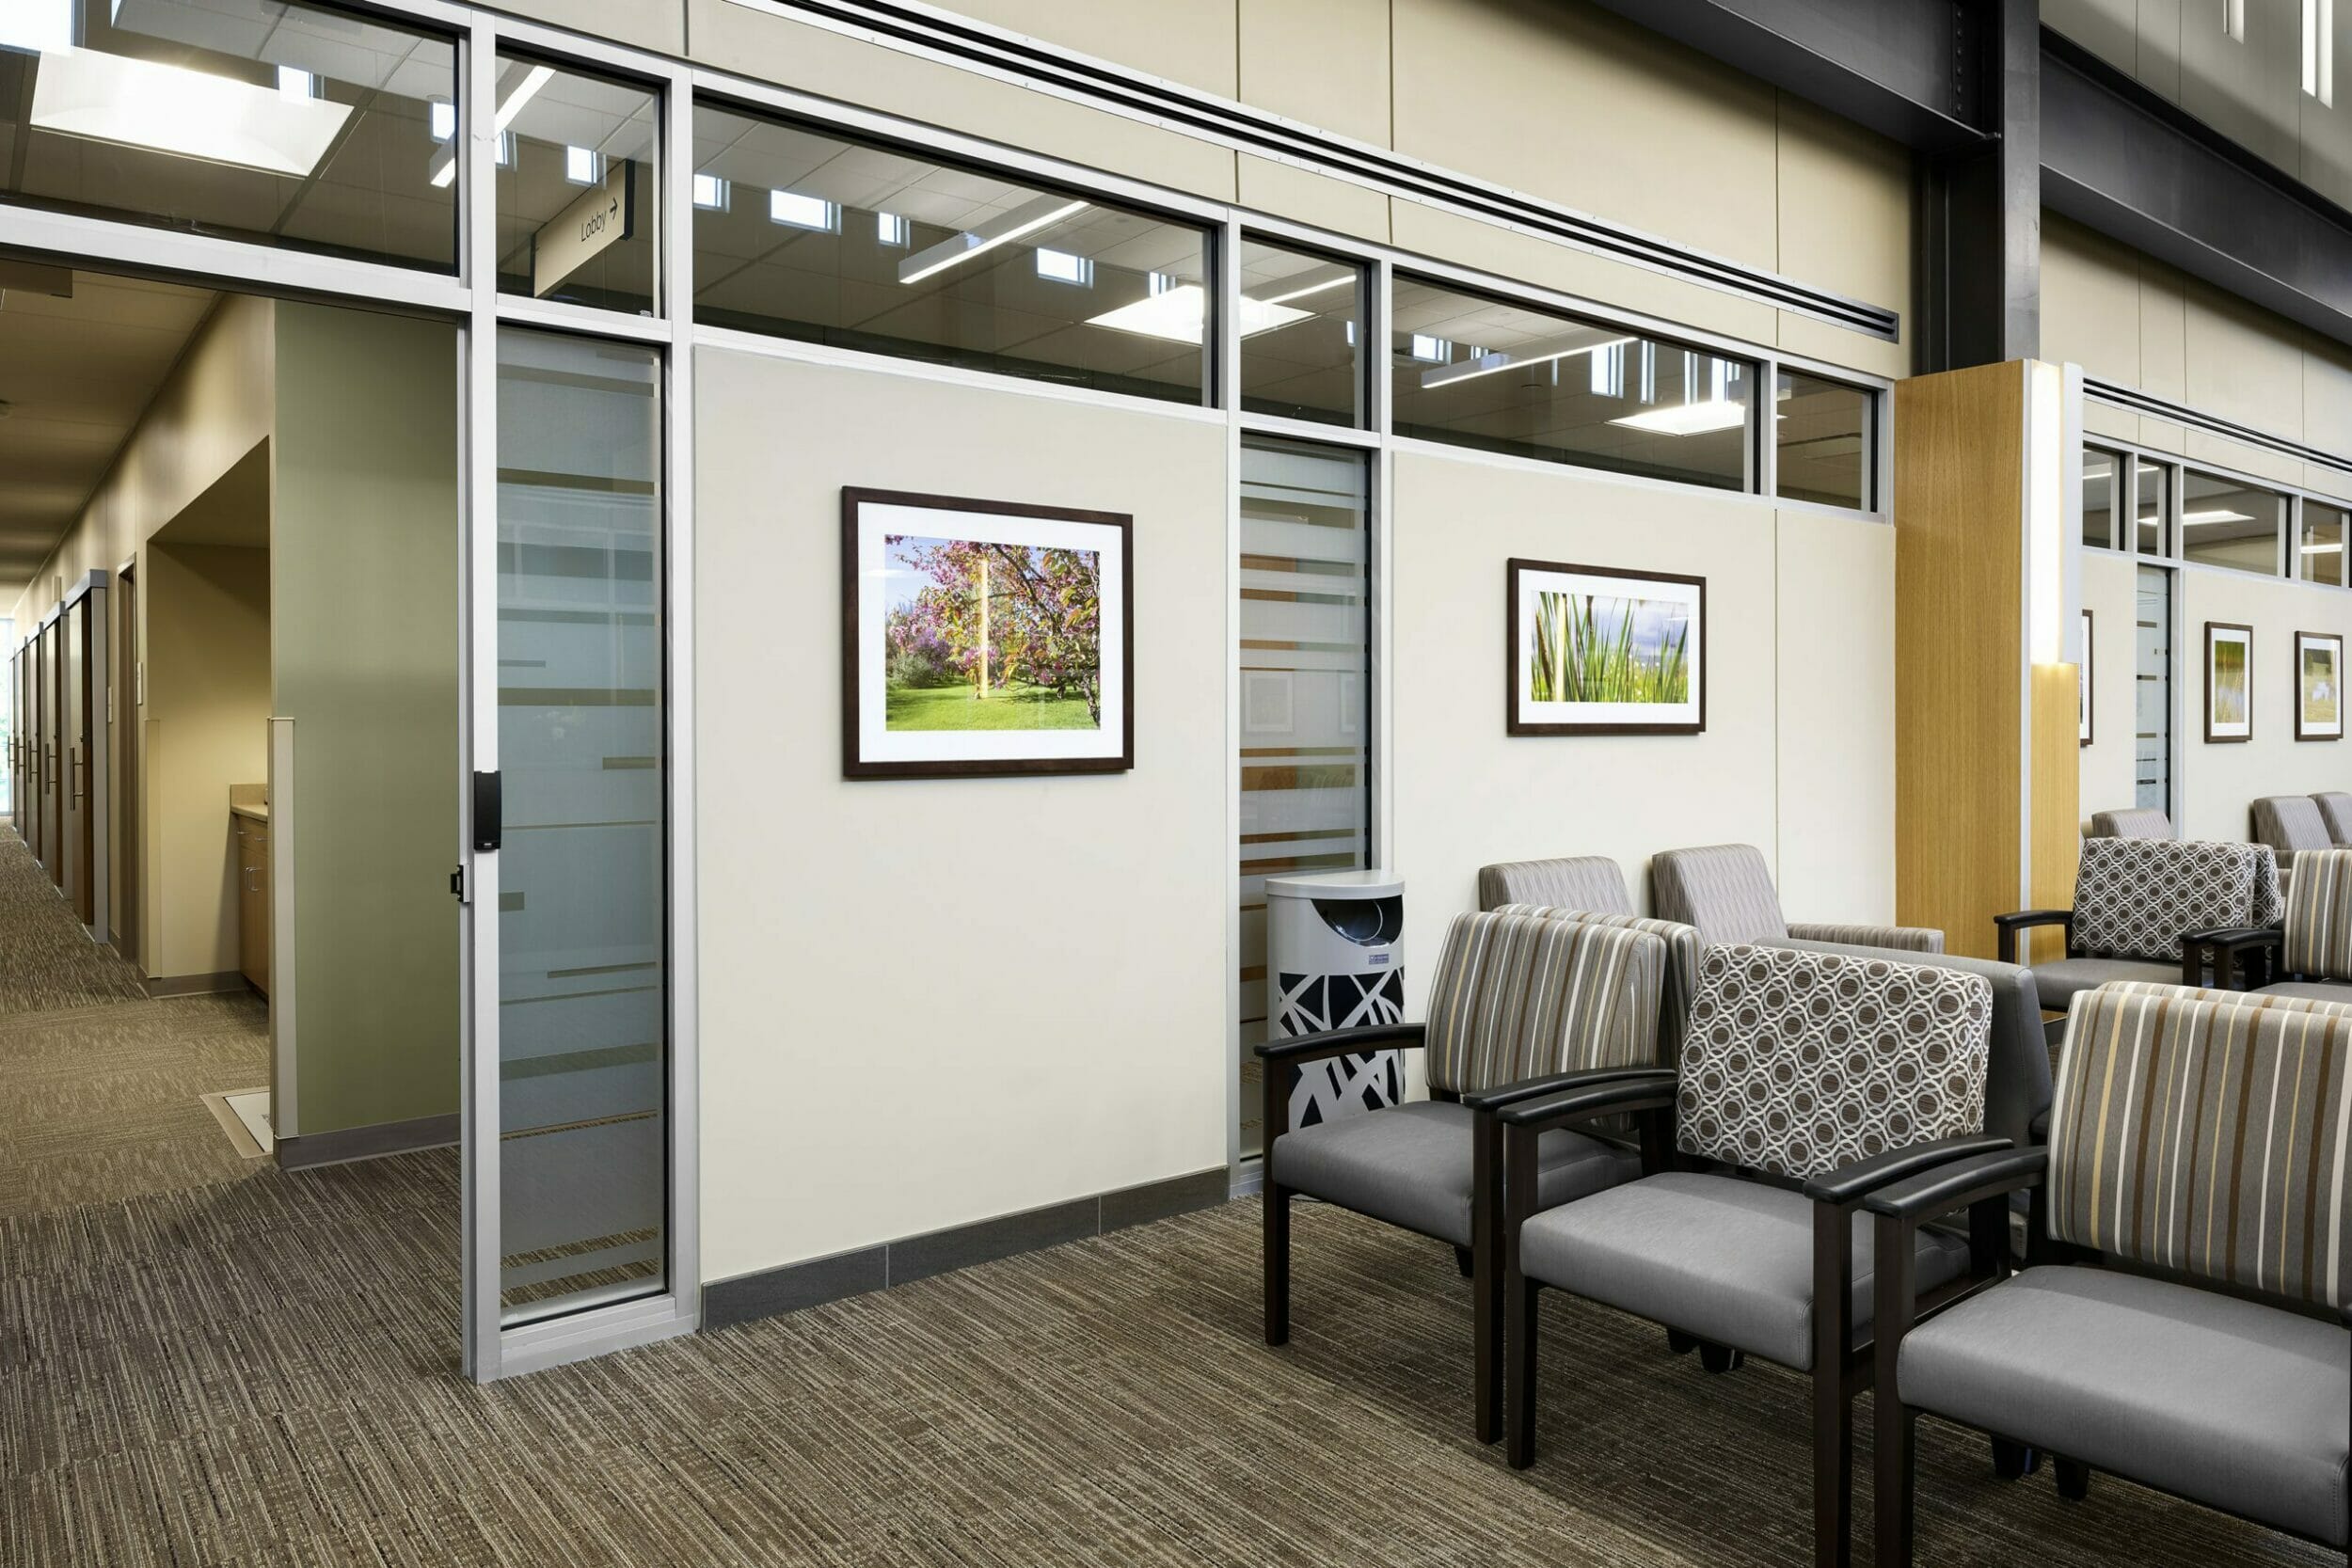 lobby/waiting area seating, nature photos on wall, medical office building